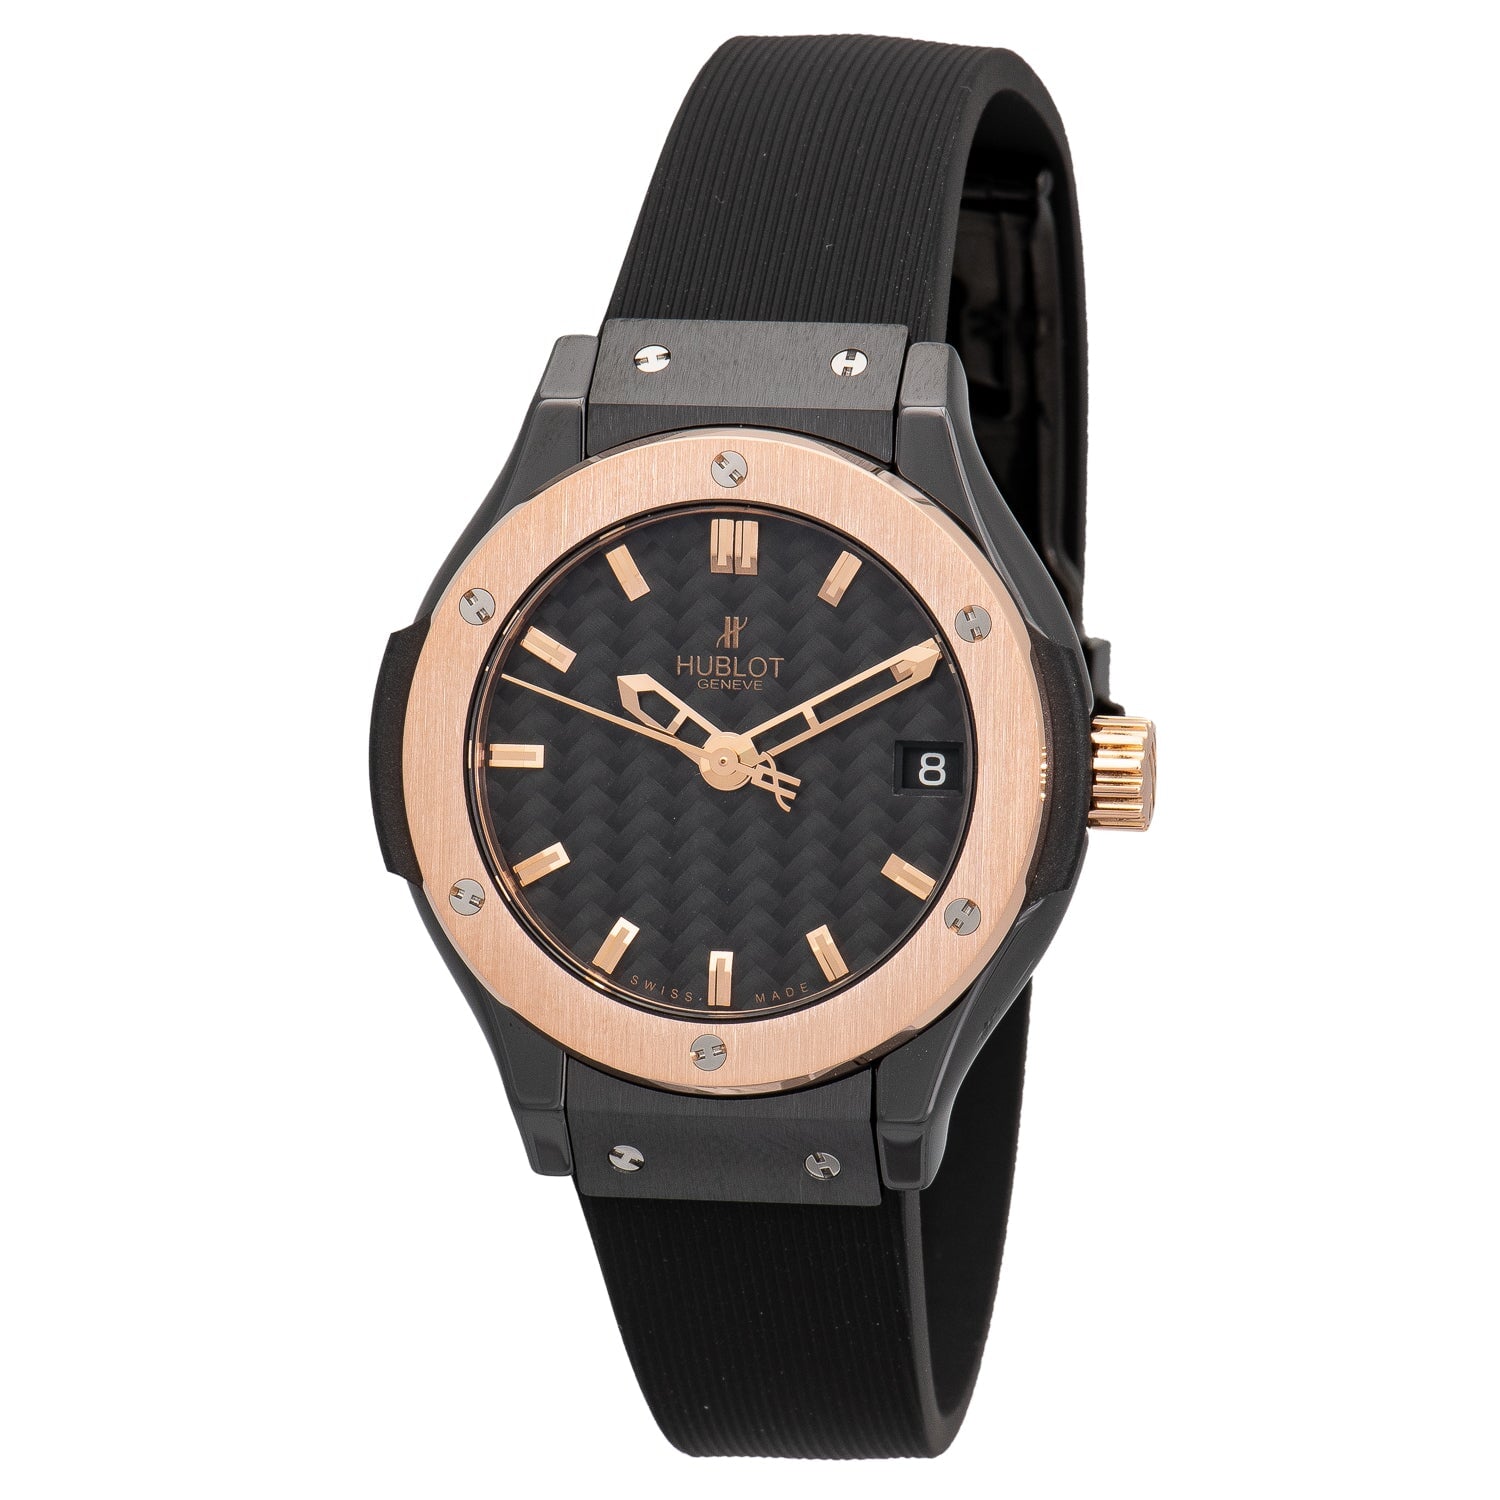 Hublot chronograph chain wrist watch *rose gold *automatic engine  *chronograph functioning Watch only: 18,500 Bracelet :3500 Comes with a  Beautiful, By F&H collections